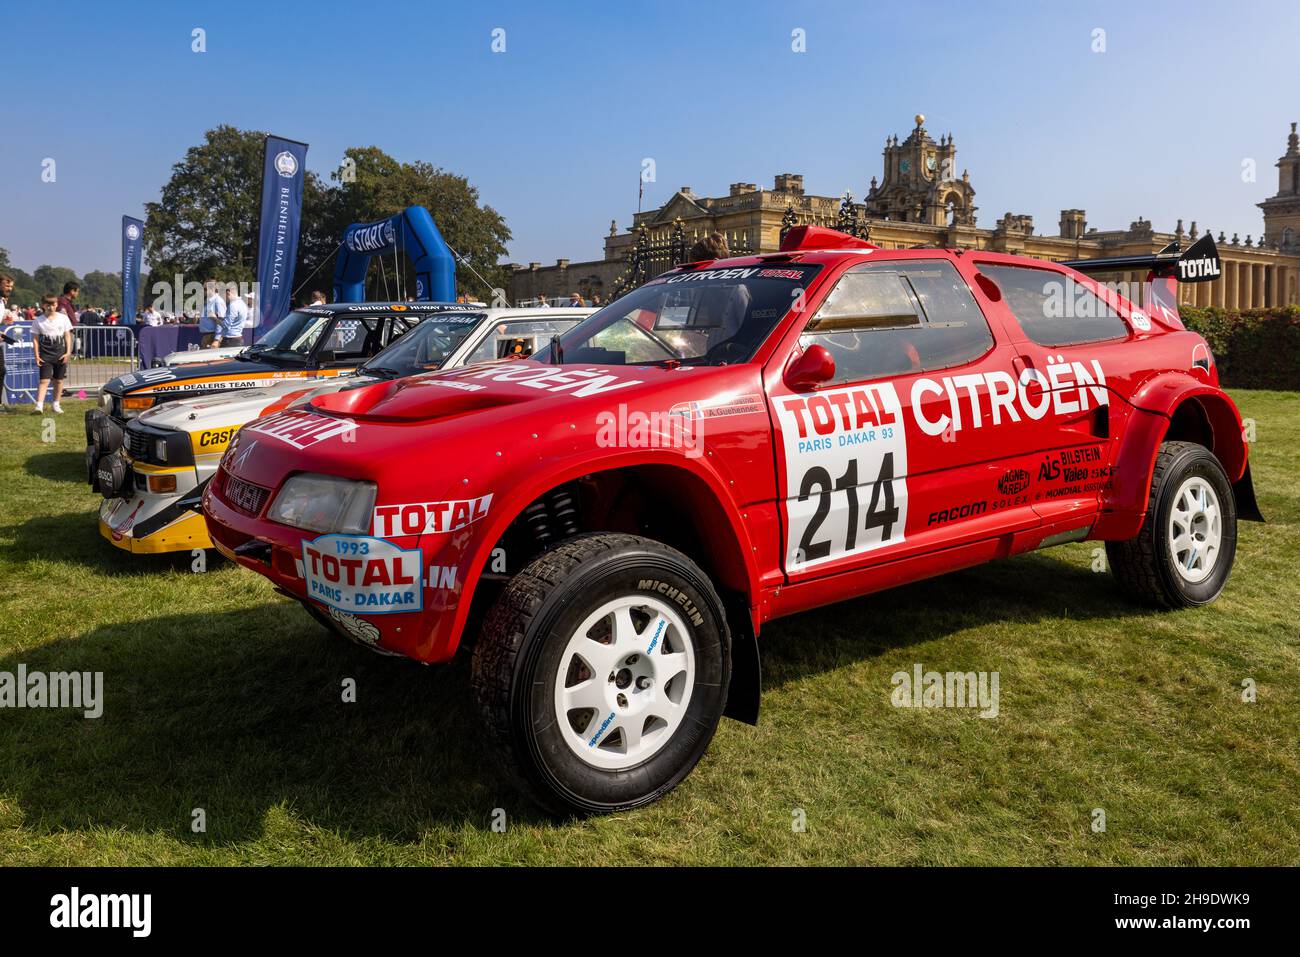 Citroën ZX Rallye-Raid Evo 2, on display at the Concours d’Elegance motor show held at Blenheim Palace on the 5th September 2021 Stock Photo